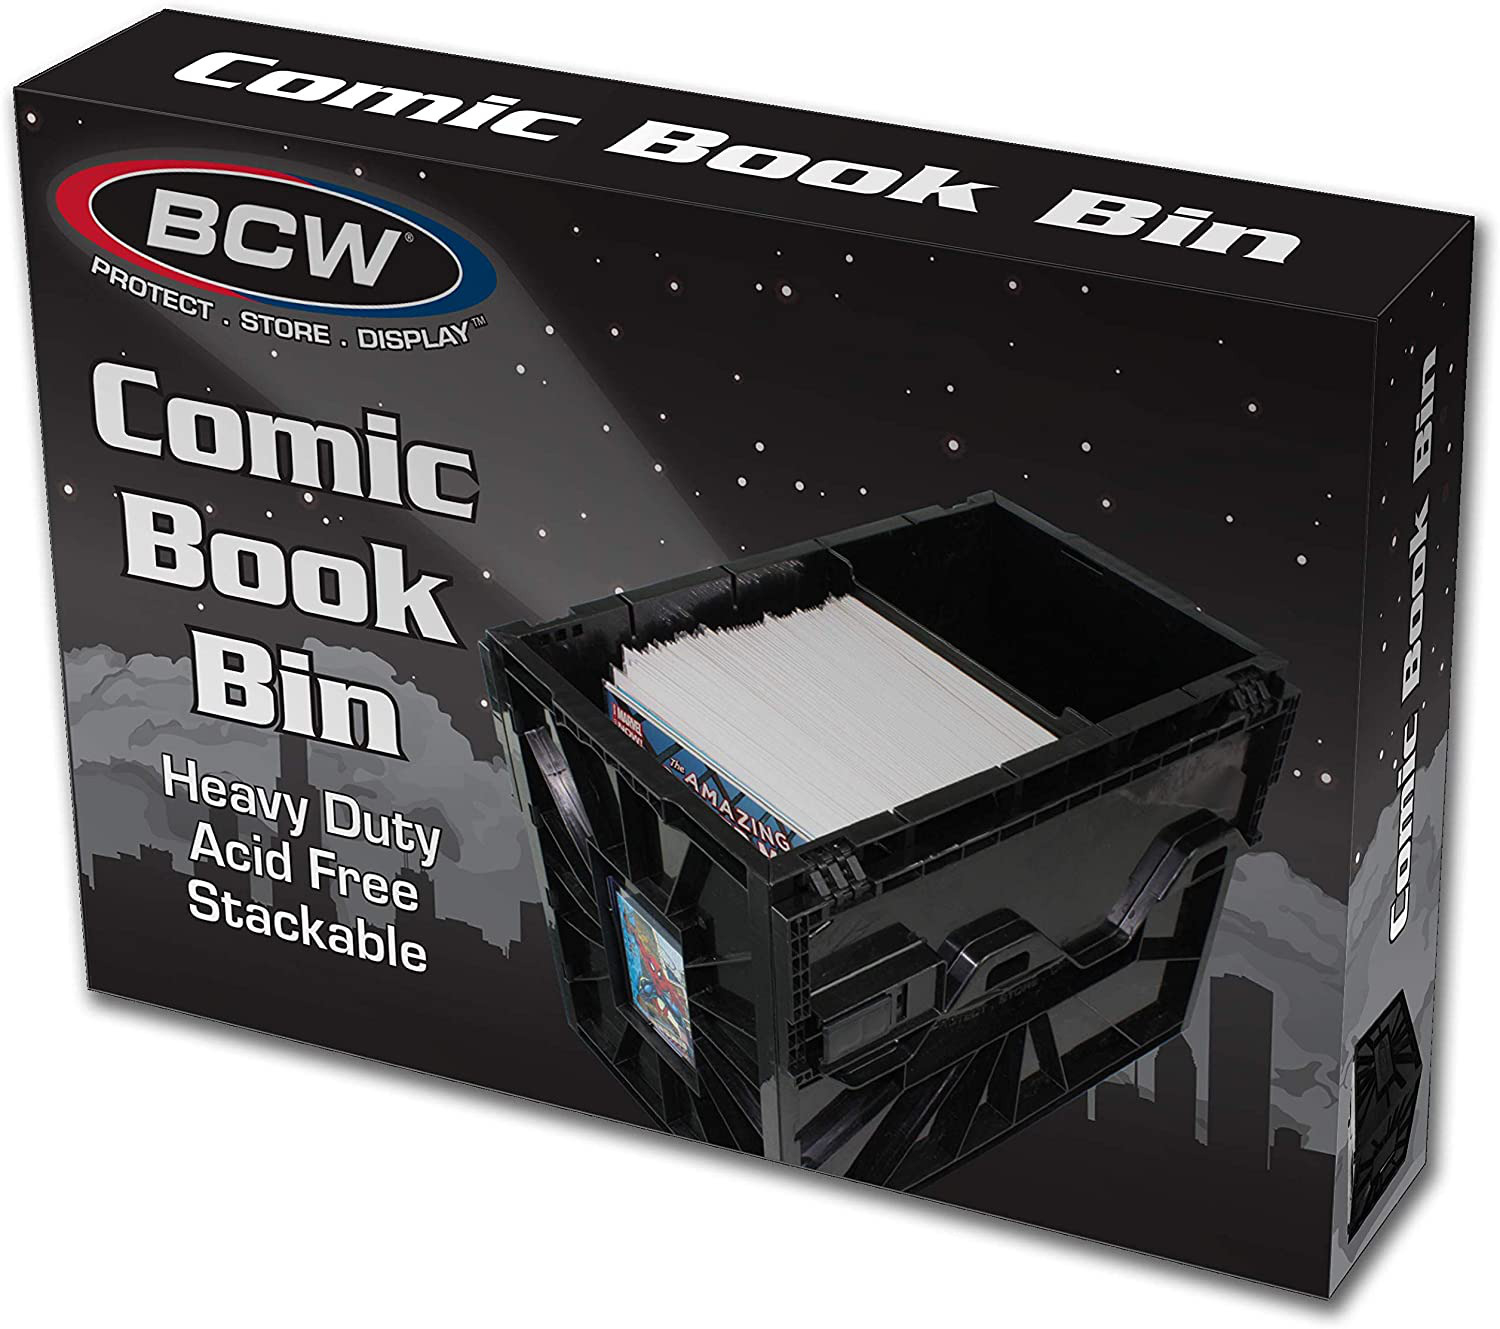 Storage for 150 Comic Book Short Bin BCW Black Plastic Box w One Partition NEW